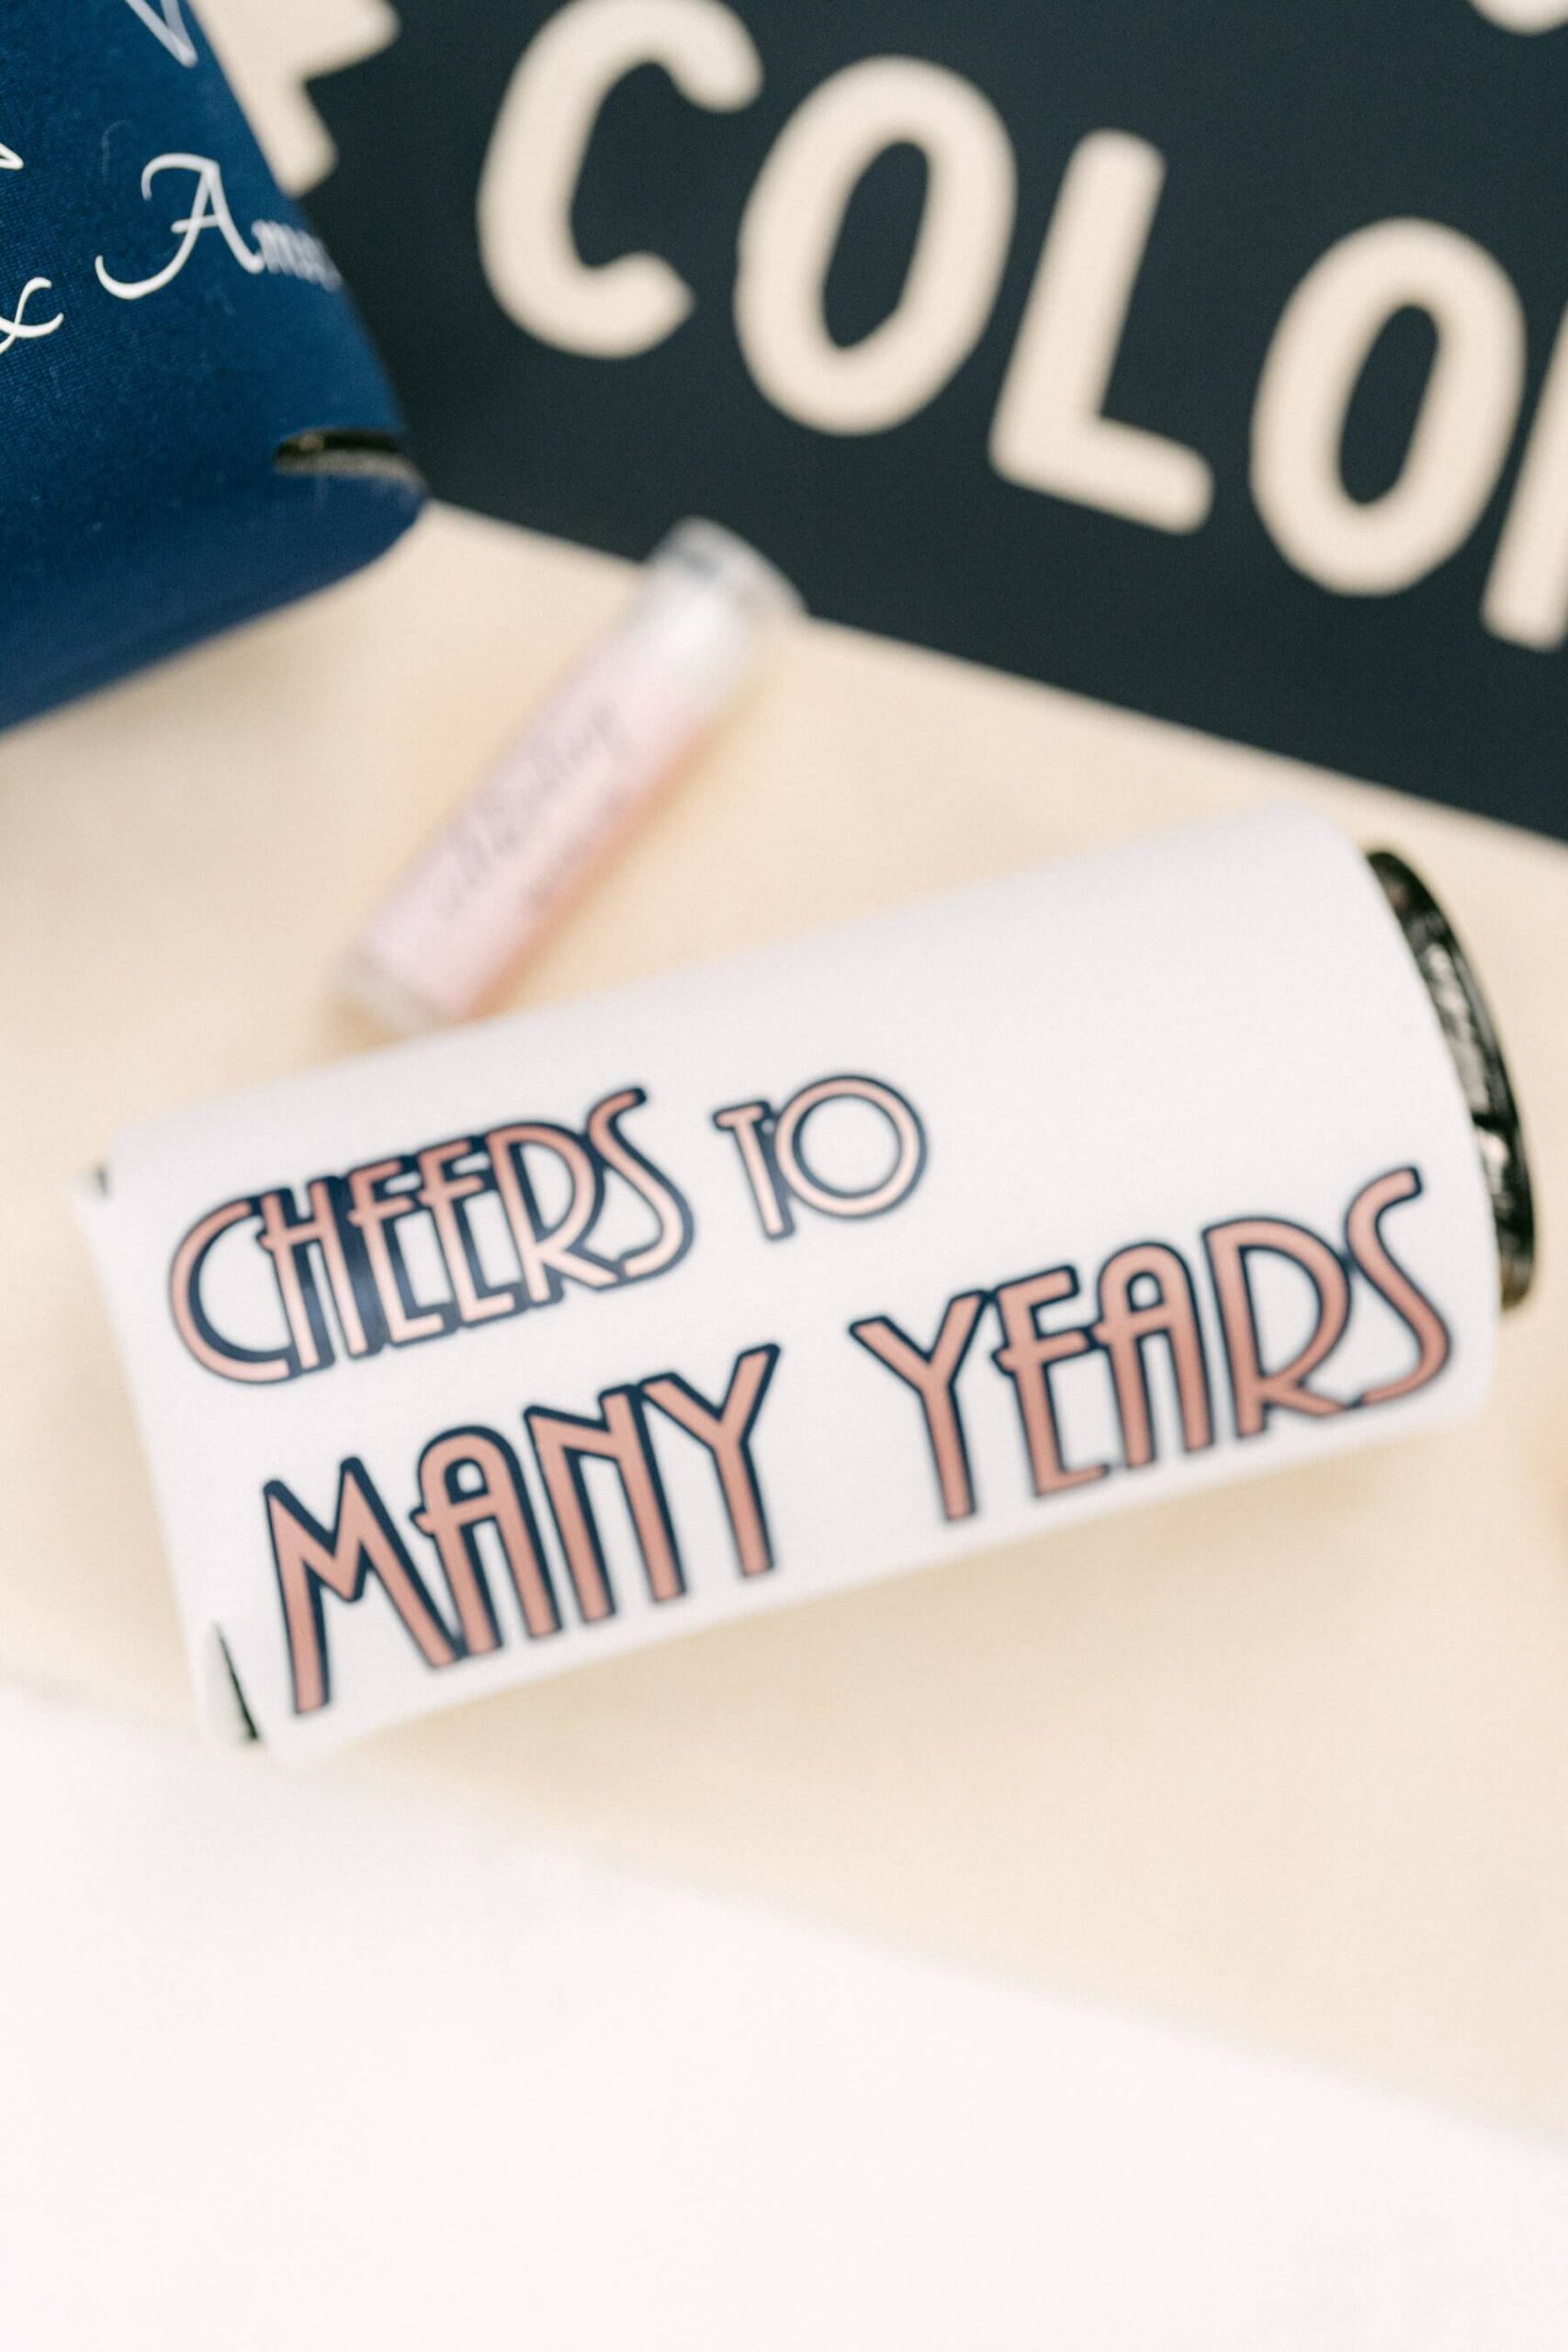 Colorado wedding welcome bags with koozie that says cheers to many years